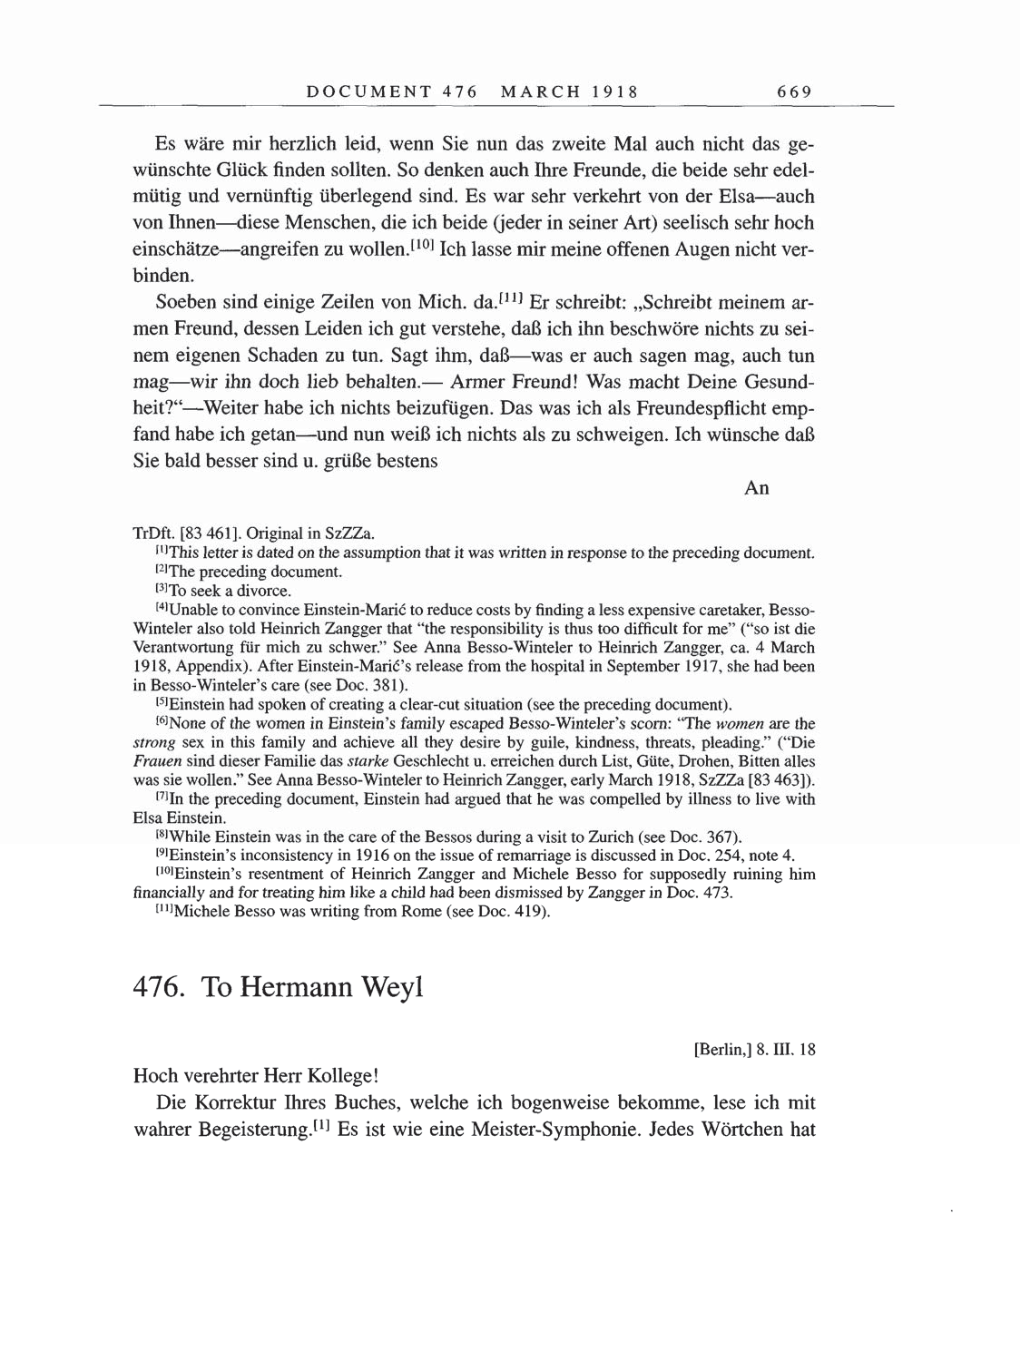 Volume 8, Part B: The Berlin Years: Correspondence 1918 page 669